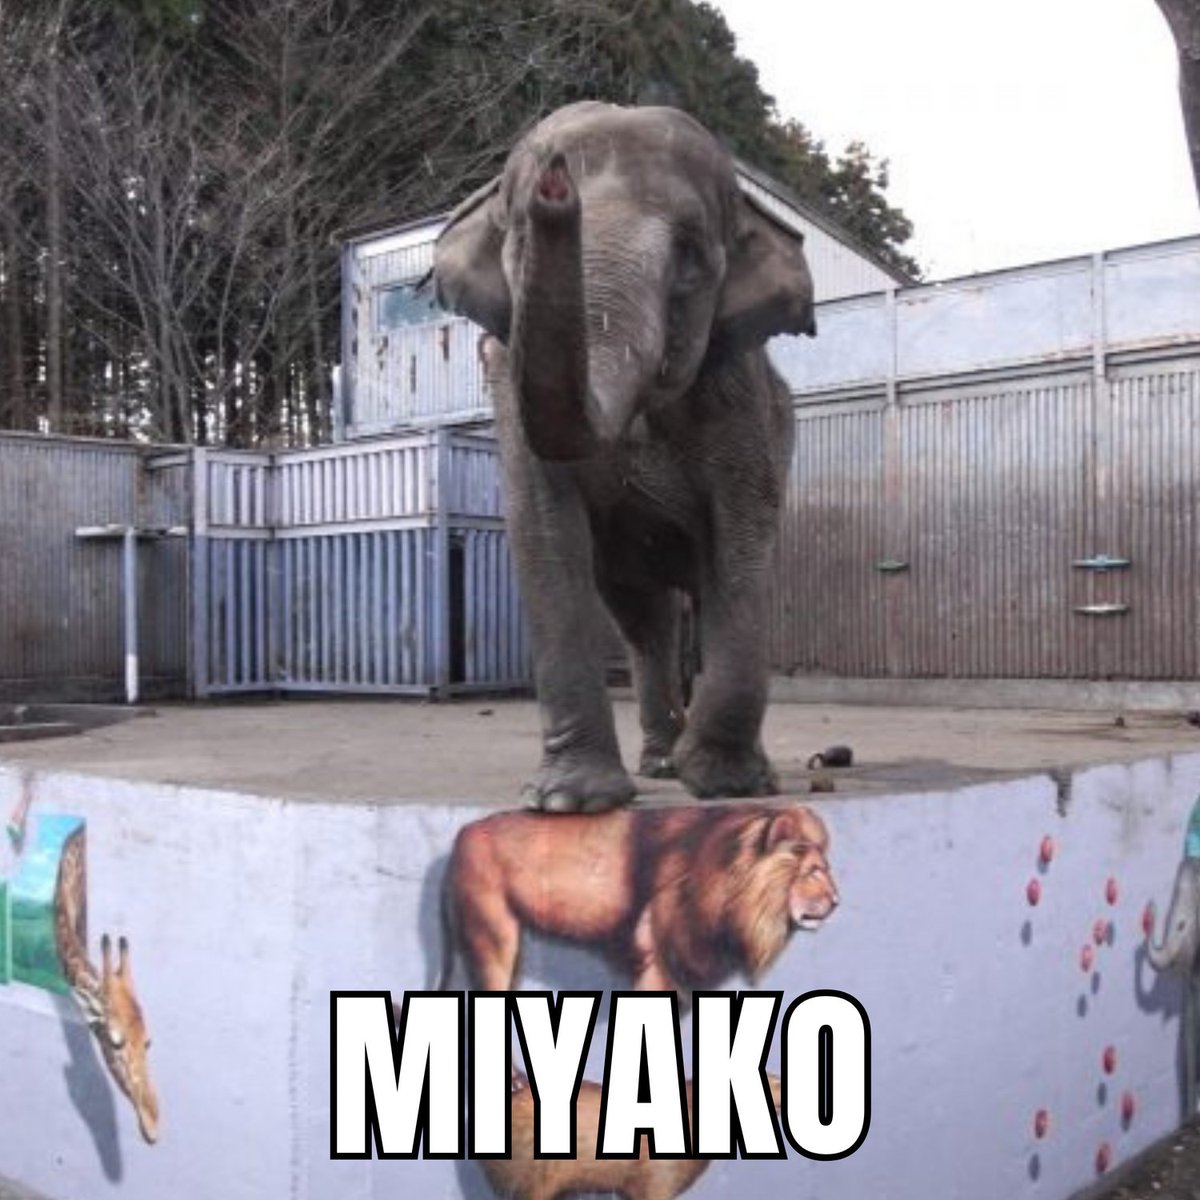 Miyako is a solitary female Asian elephant who has been living alone at the Utsunomiya Zoo in Japan since Dec 12, 1973. She was captured from Thailand when she was six months old and has never had a companion of her own species at the zoo.

🐘wikianimal.org/en/index.php/M…